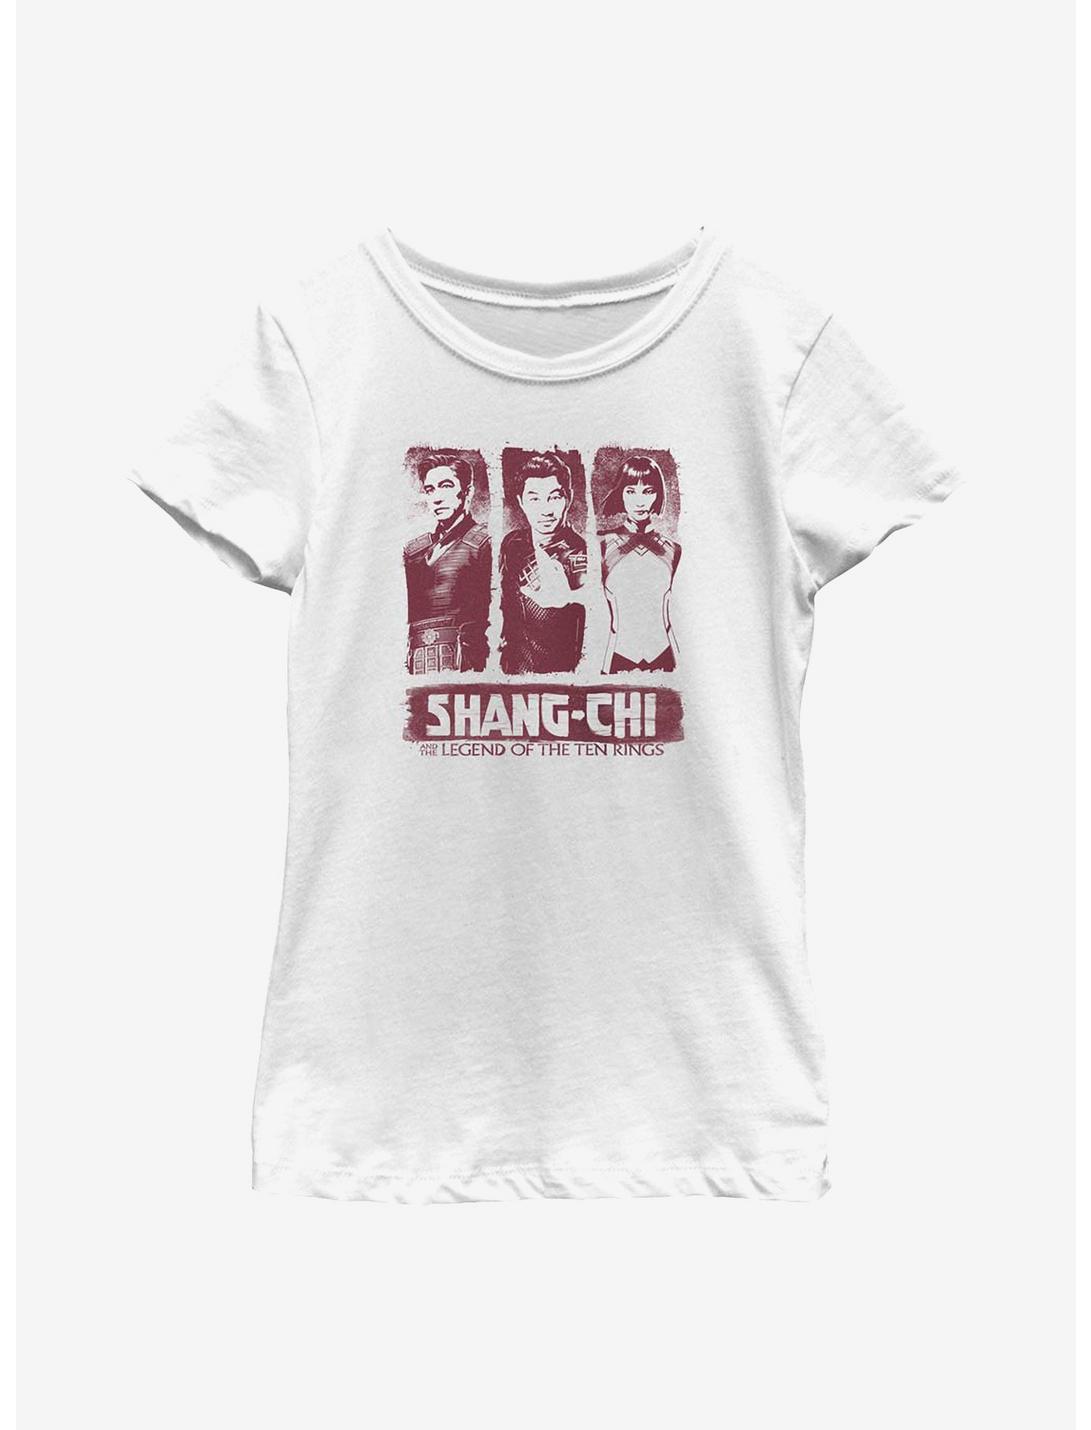 Marvel Shang-Chi And The Legend Of The Ten Rings Family Panel Youth Girls T-Shirt, WHITE, hi-res